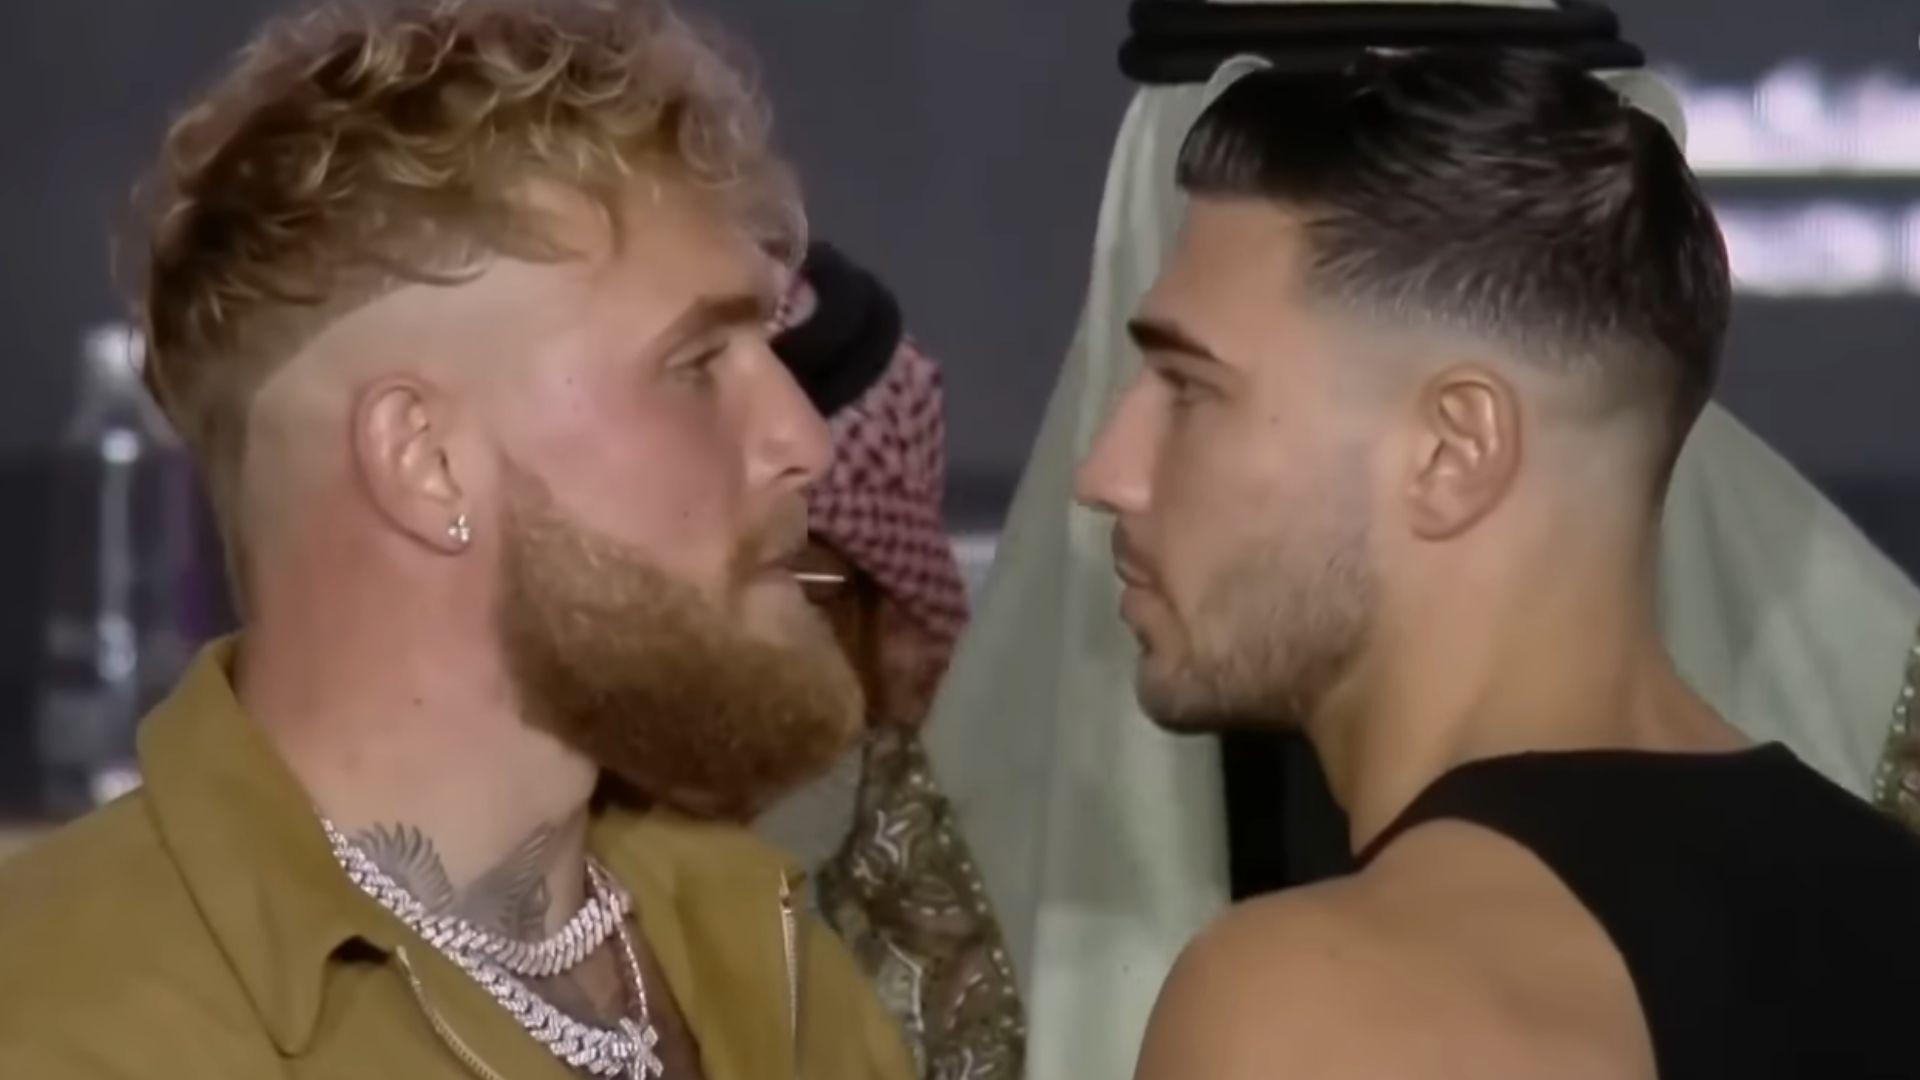 Jake Paul and Tommy Fury face-to-face at weigh in